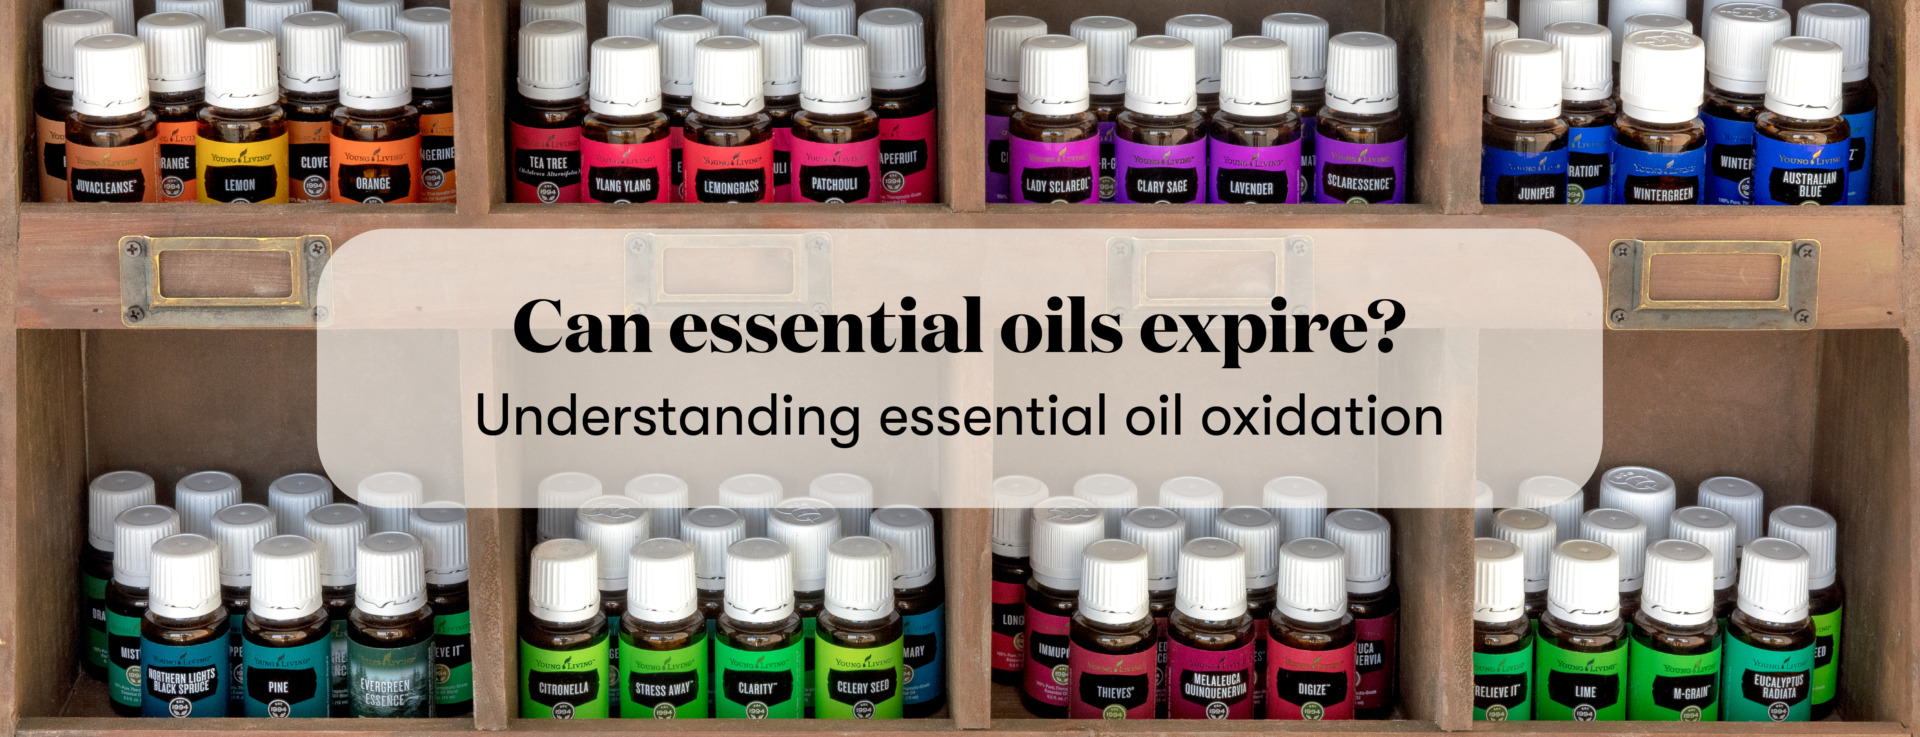 Time 4 Change - Essential Oils & More - One of my favorite new